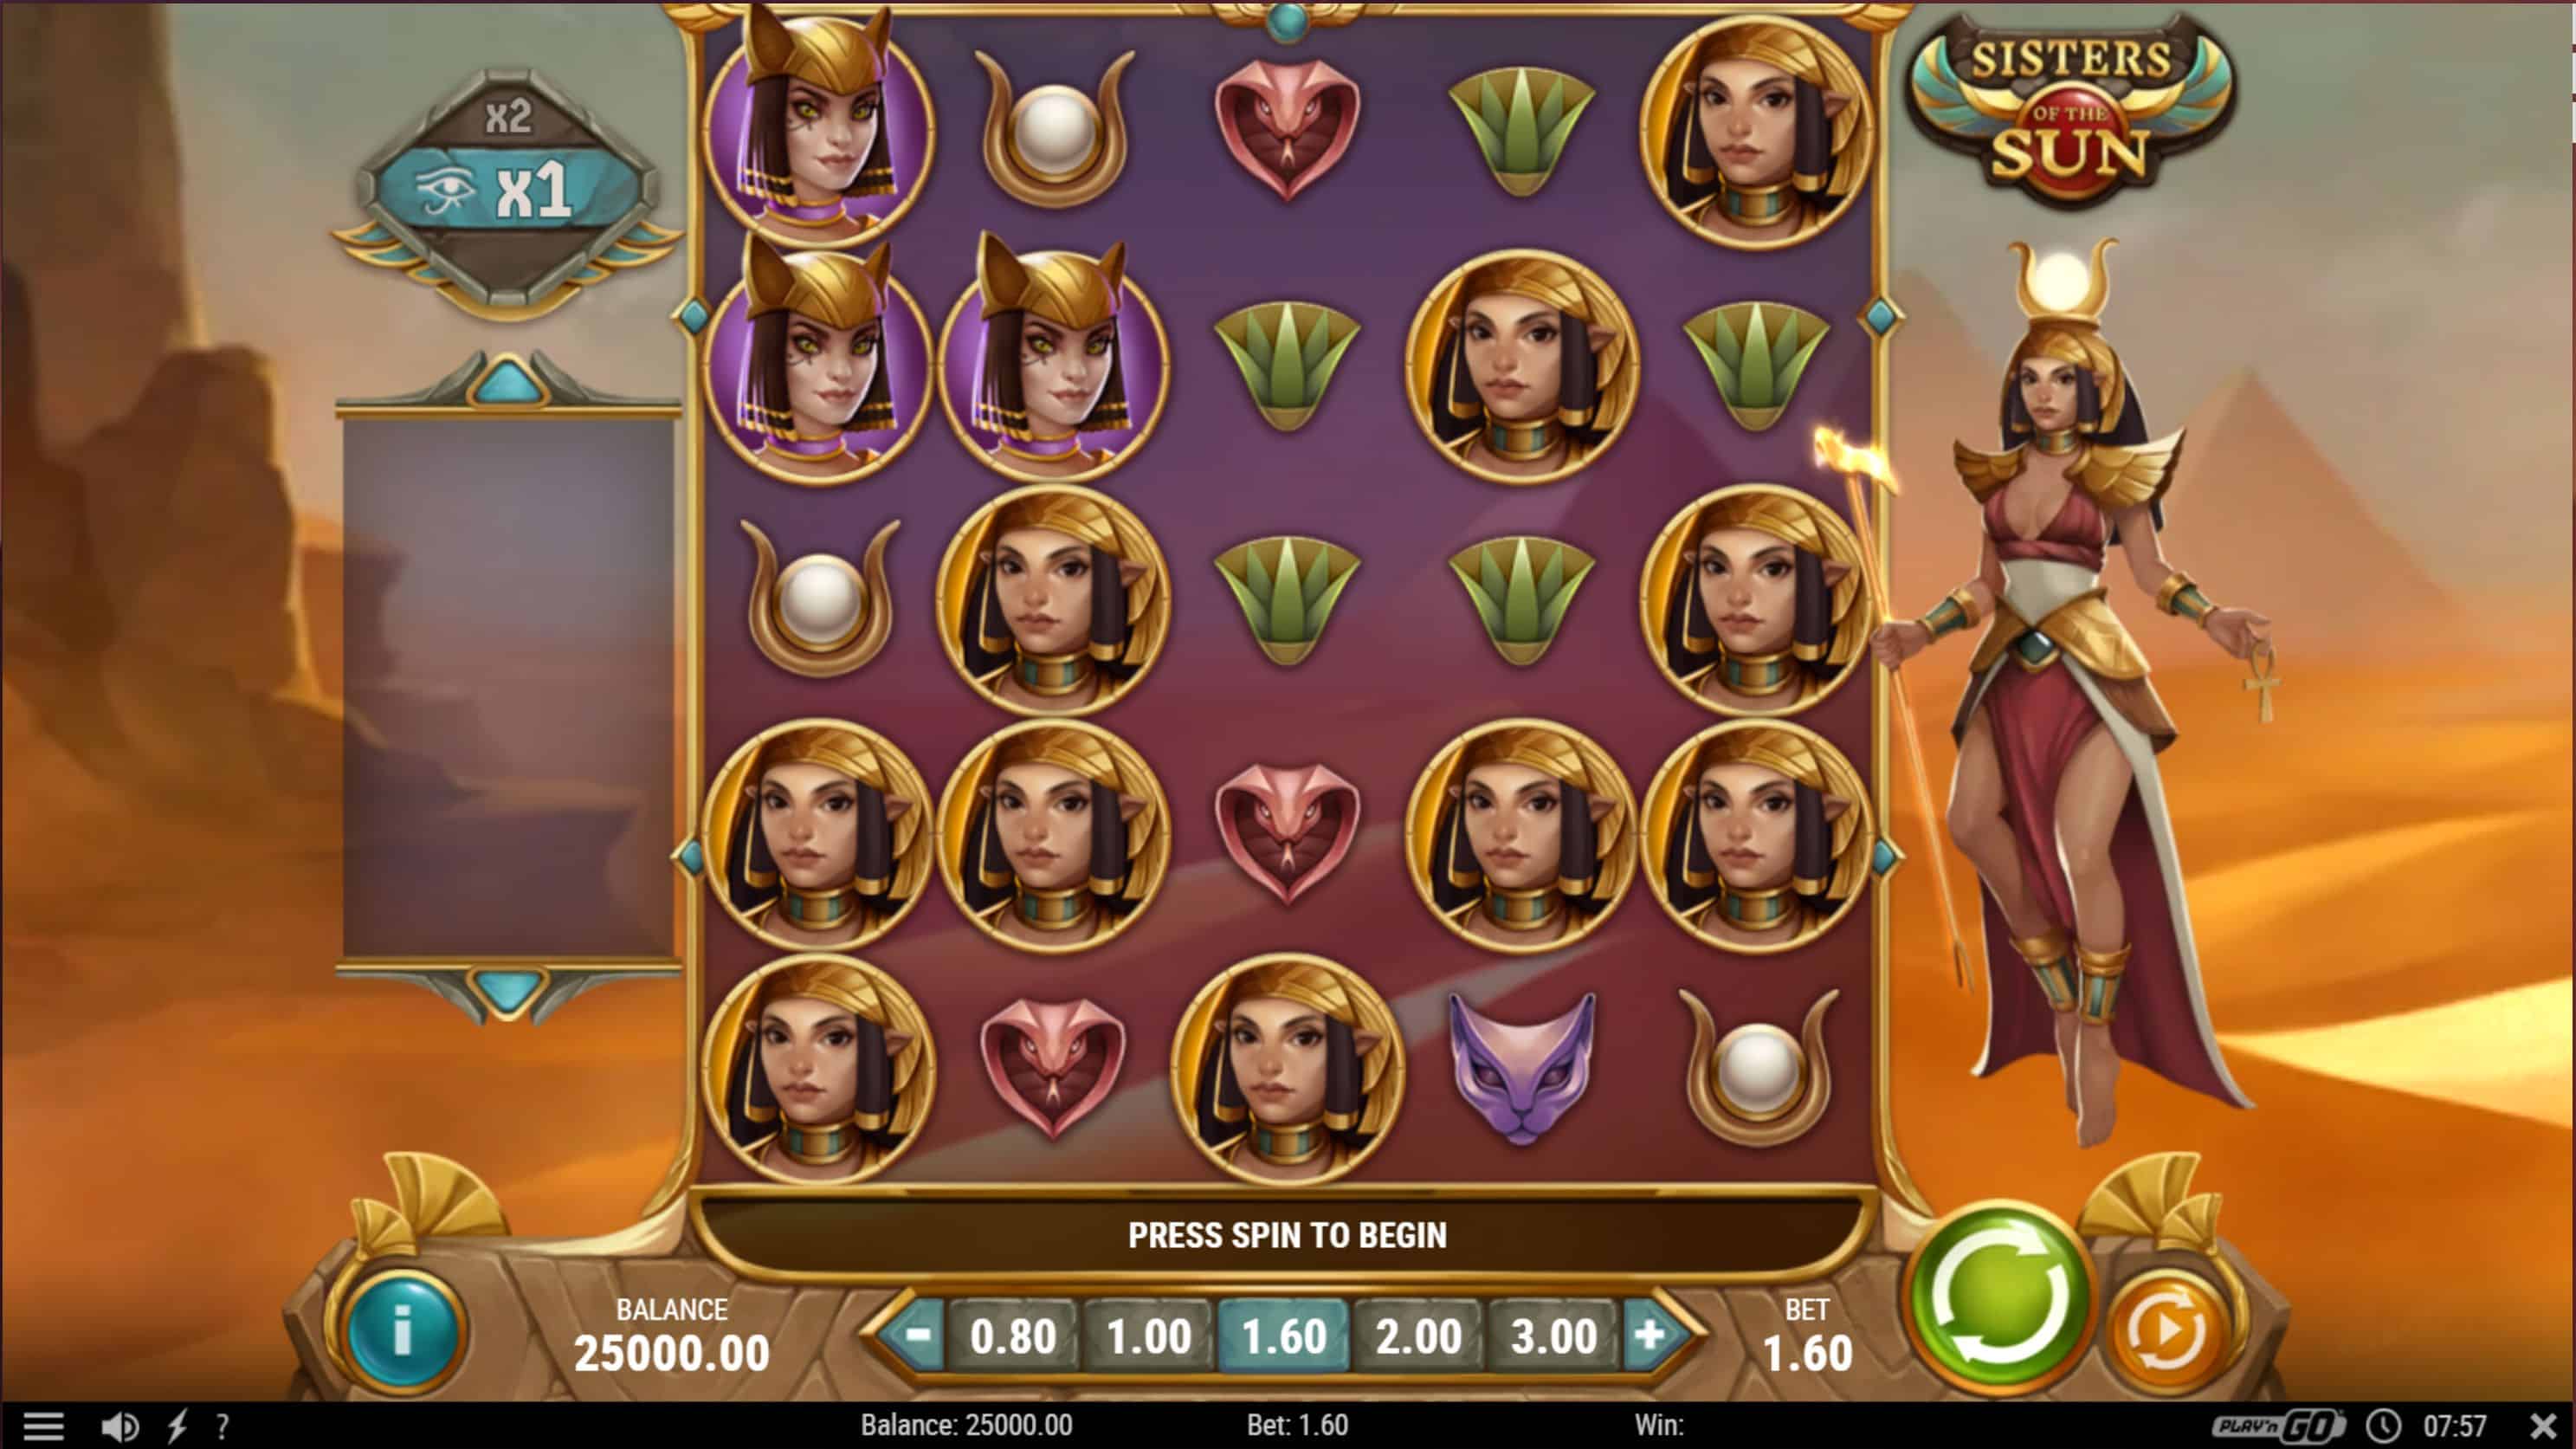 Sisters of the Sun Slot Game Free Play at Casino Ireland 01